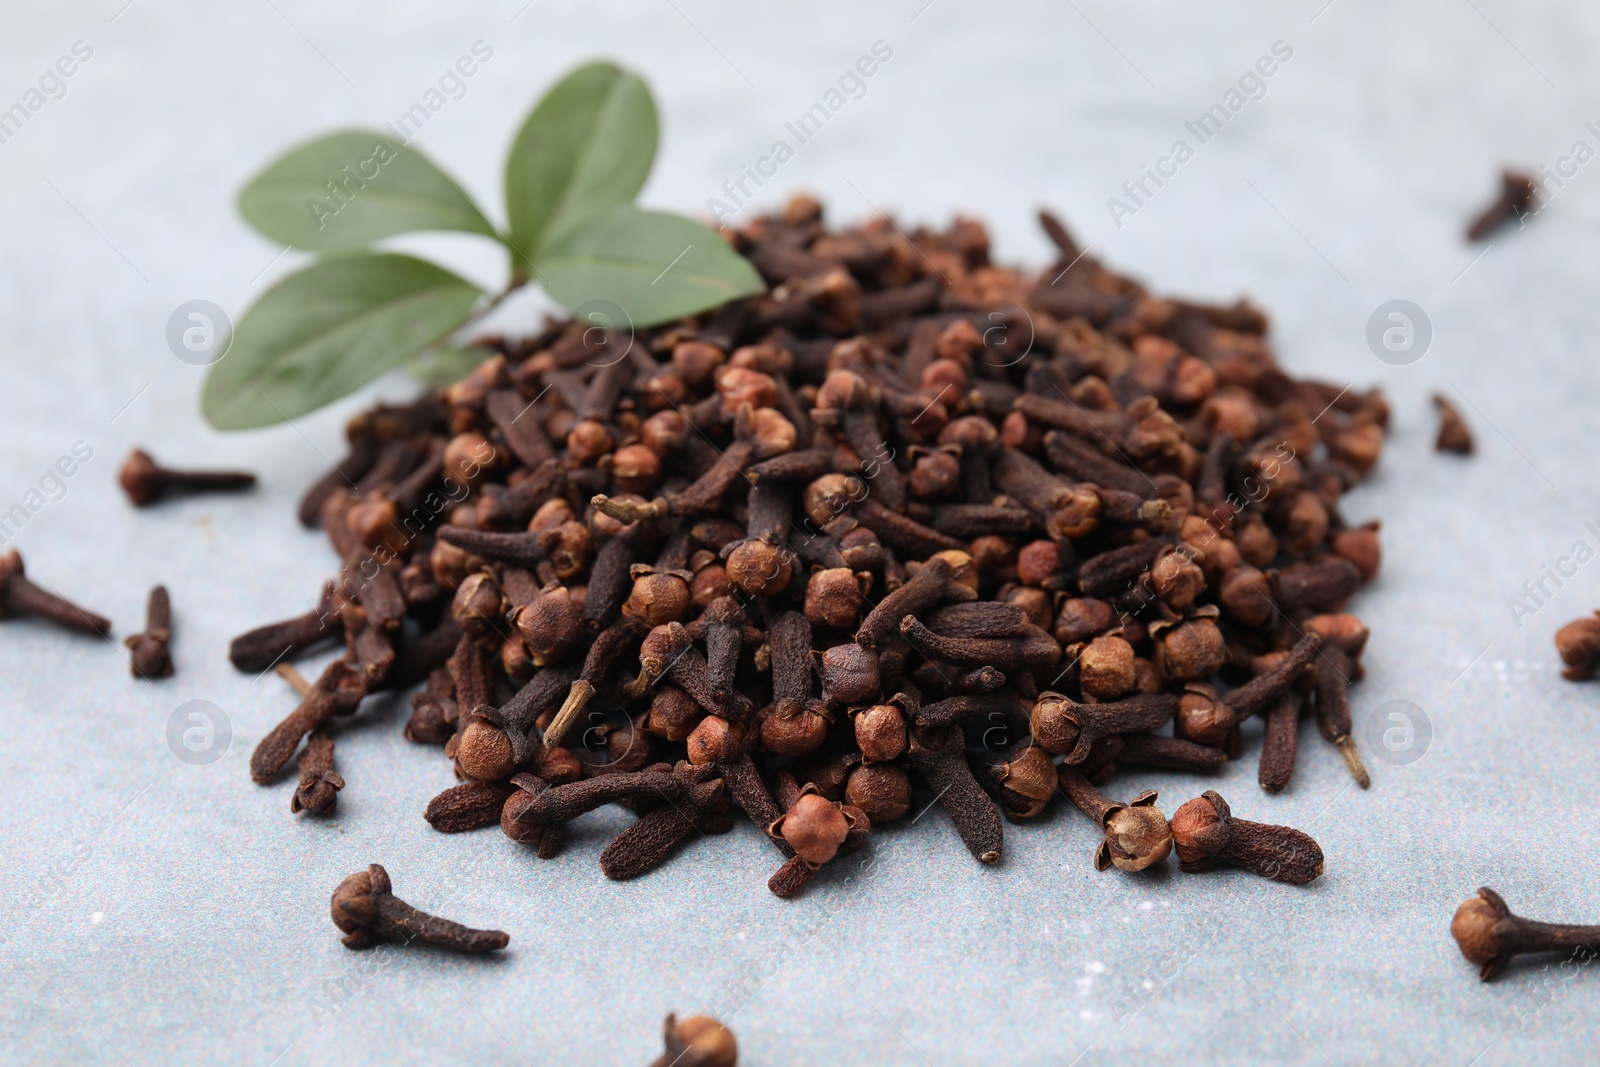 Photo of Pile of aromatic dried clove buds and leaves on grey table, closeup